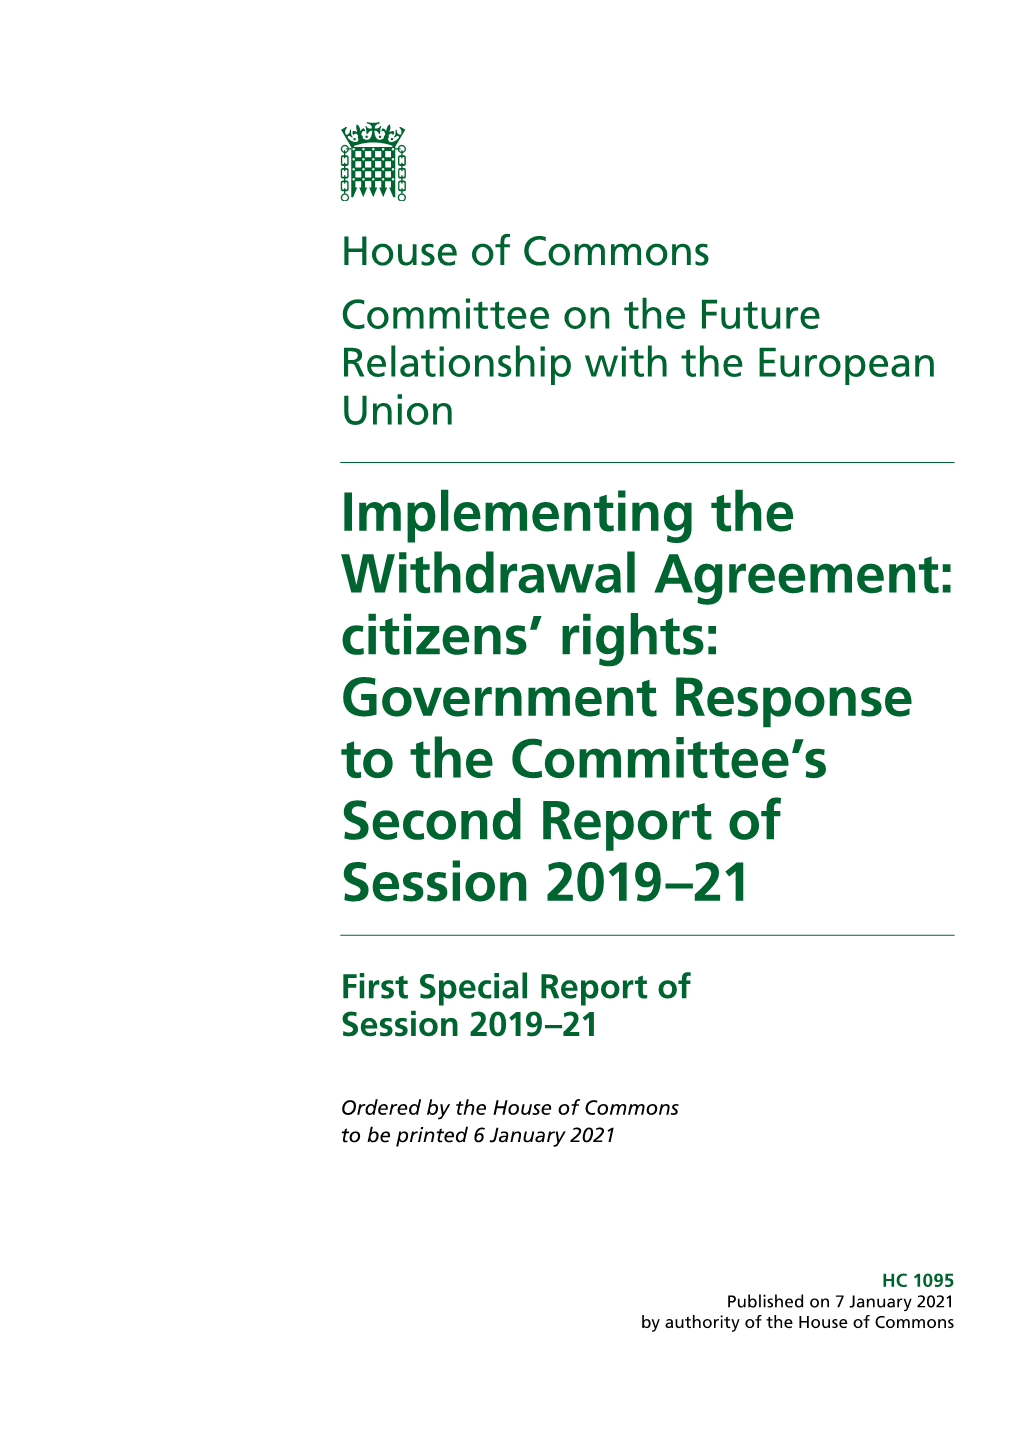 Implementing the Withdrawal Agreement: Citizens’ Rights: Government Response to the Committee’S Second Report of Session 2019–21